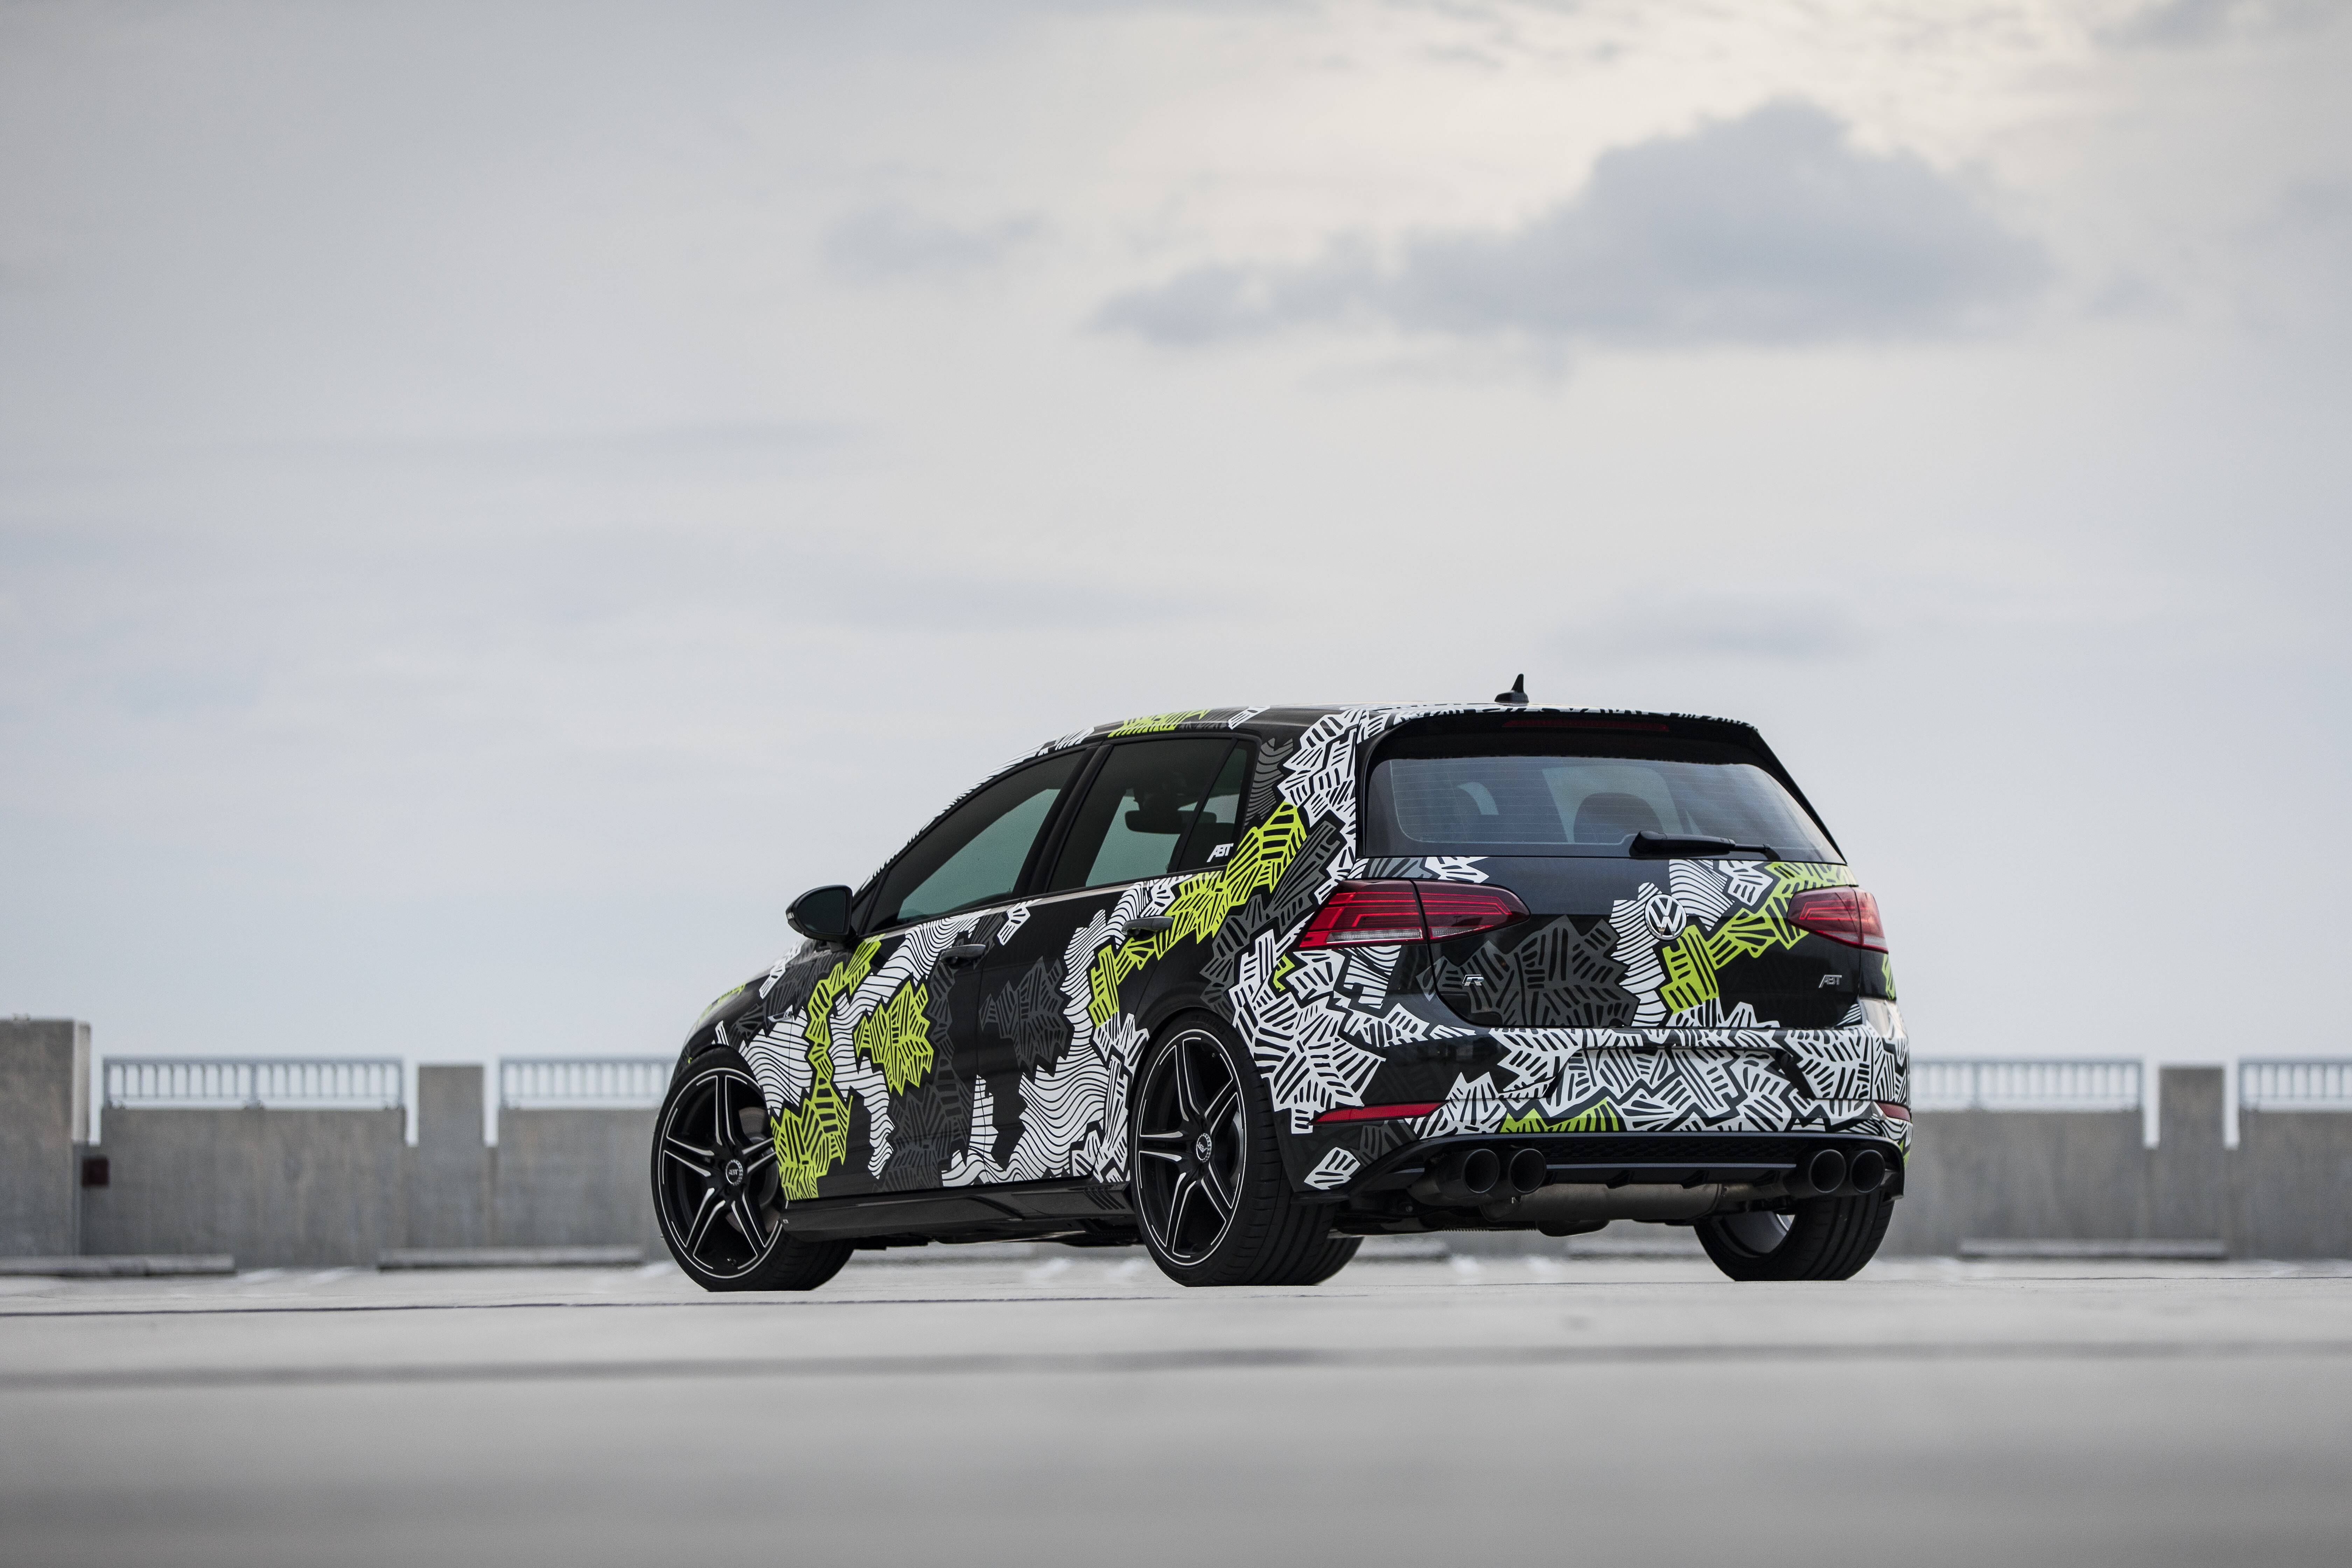 VW Golf R modified by ABT part of “2018 Volkswagen Enthusiast Vehicle  Fleet” - Audi Tuning, VW Tuning, Chiptuning von ABT Sportsline.